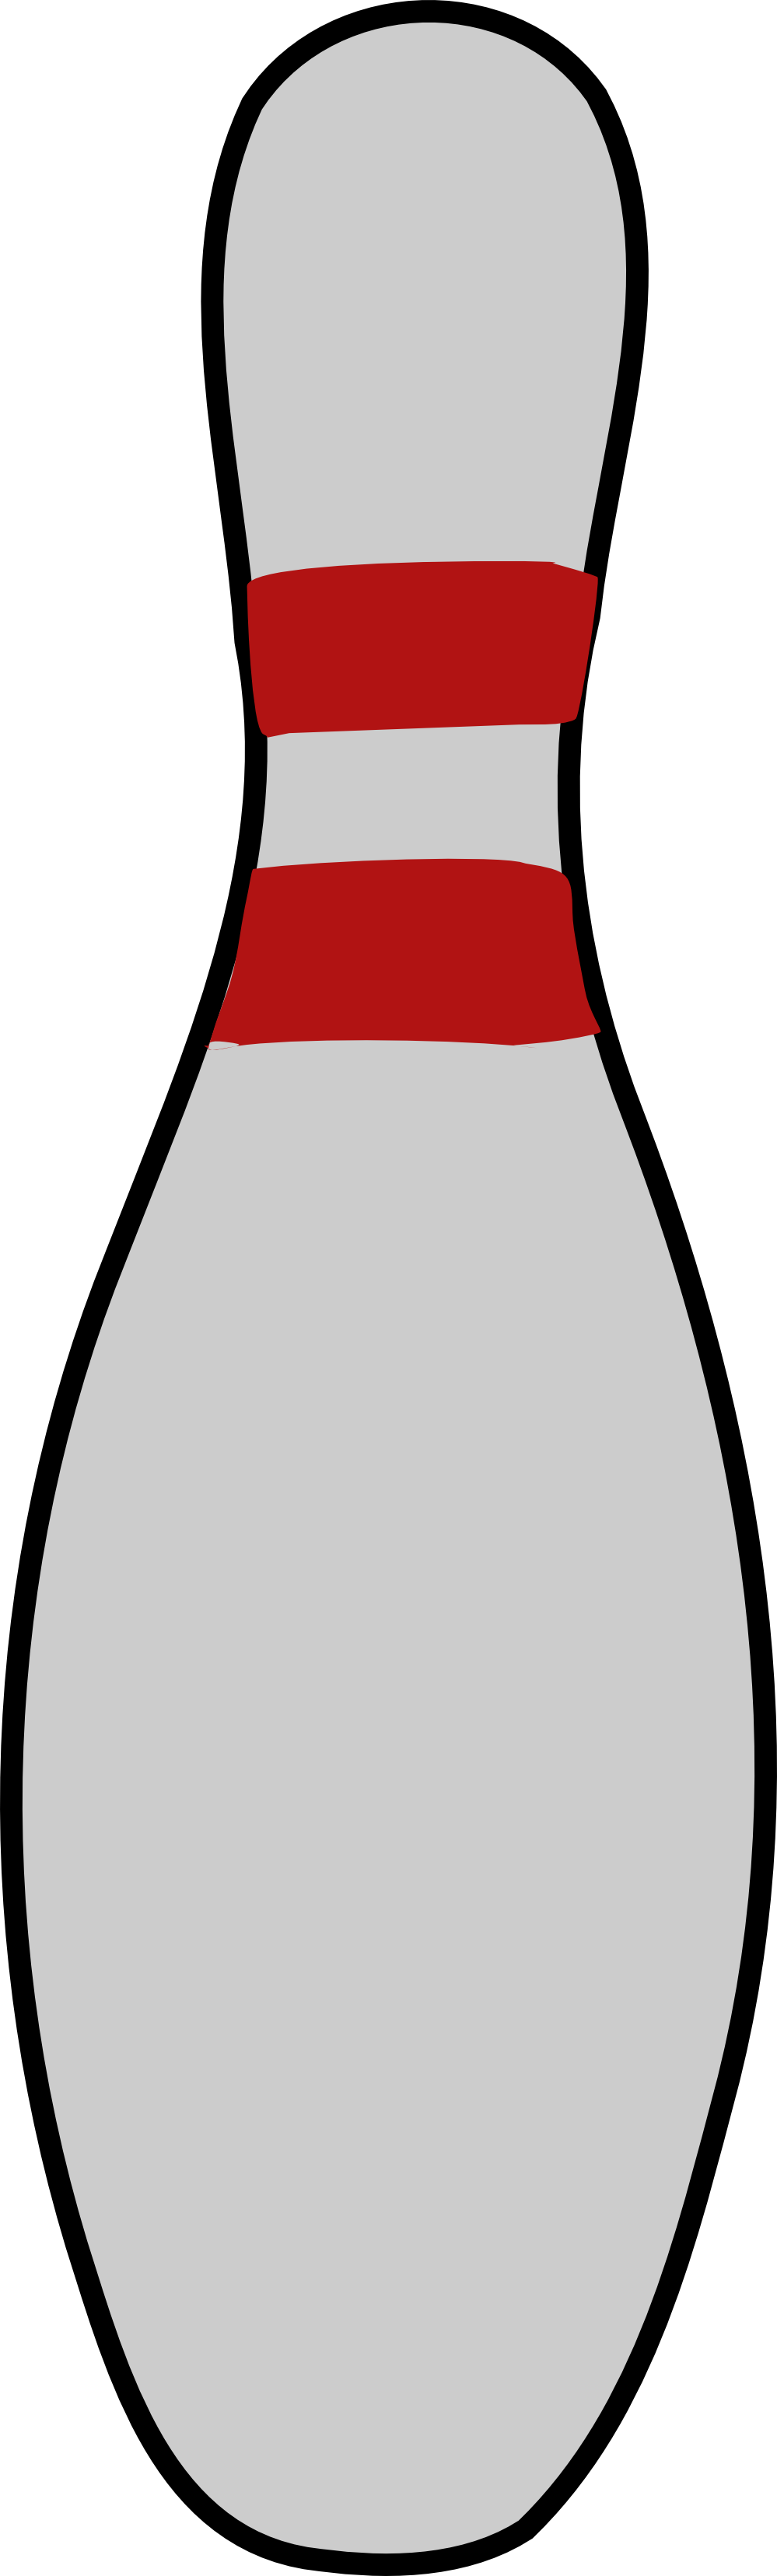 Bowling Pin Coloring Page - ClipArt Best